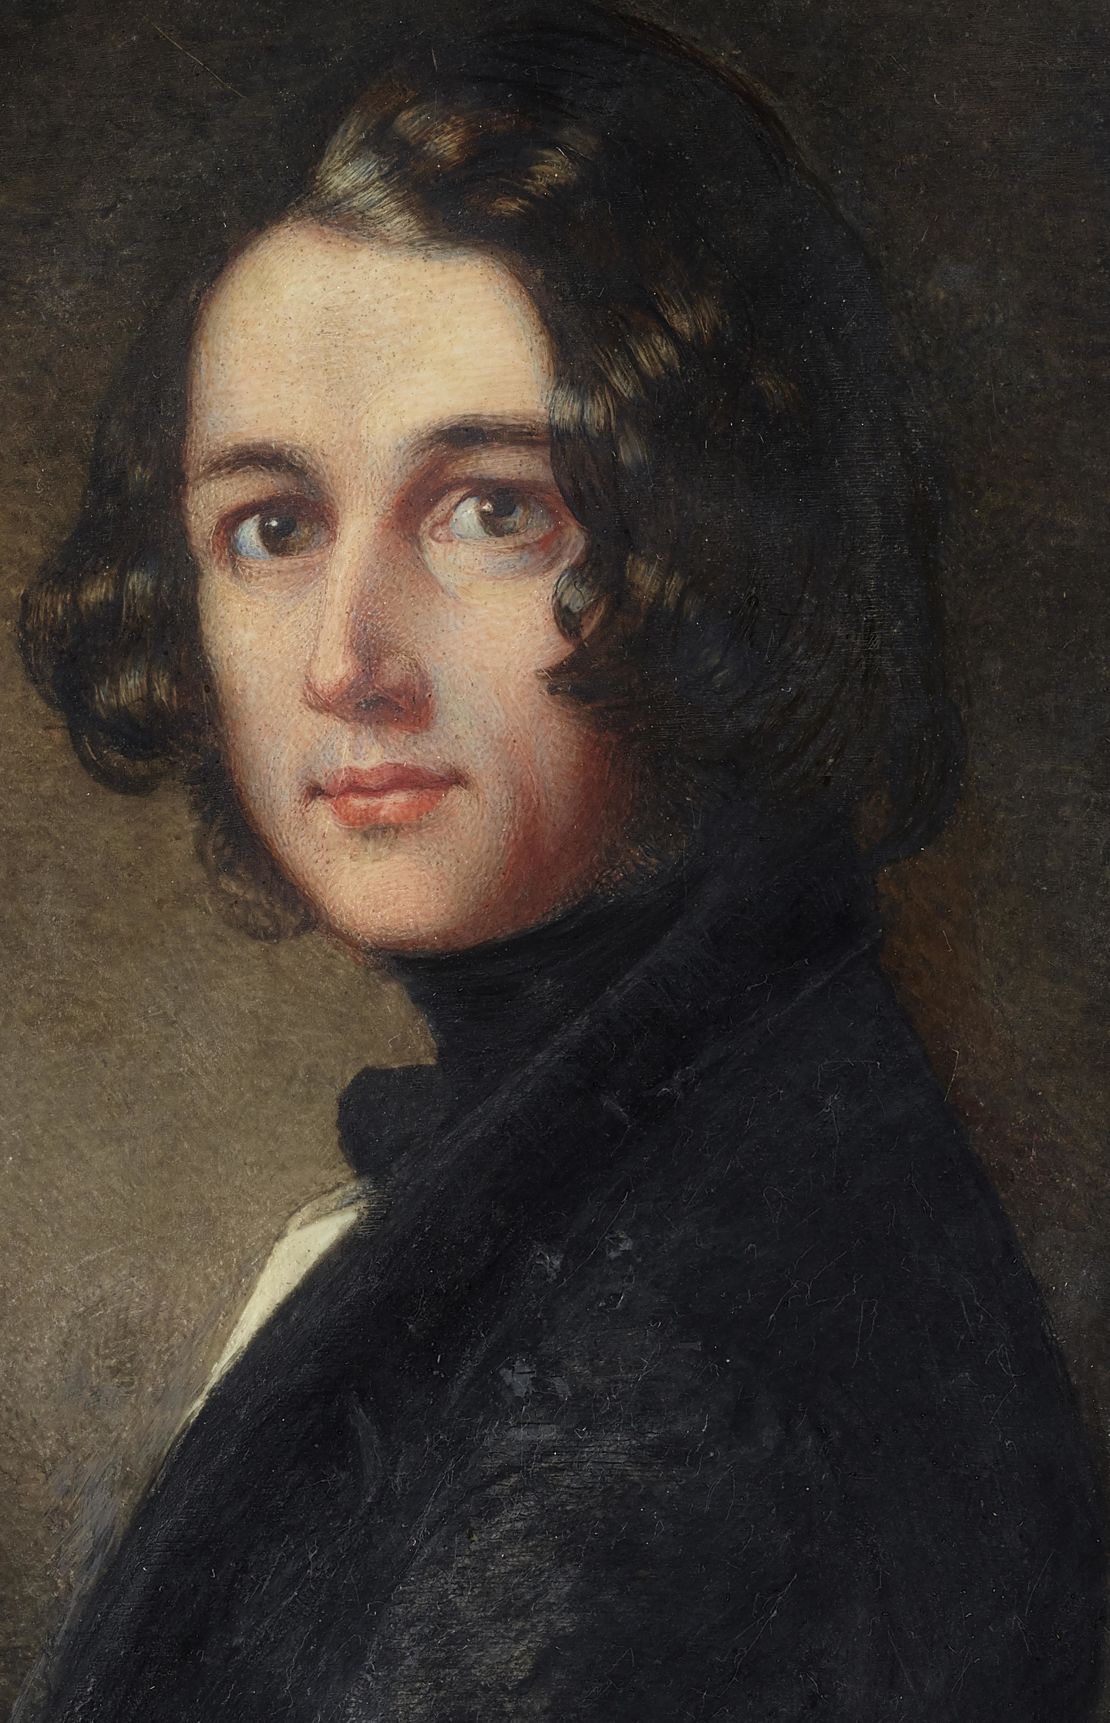 The lost portrait of Charles Dickens at the age of 31, painted by Margaret Gillies, was lost for 174 years.